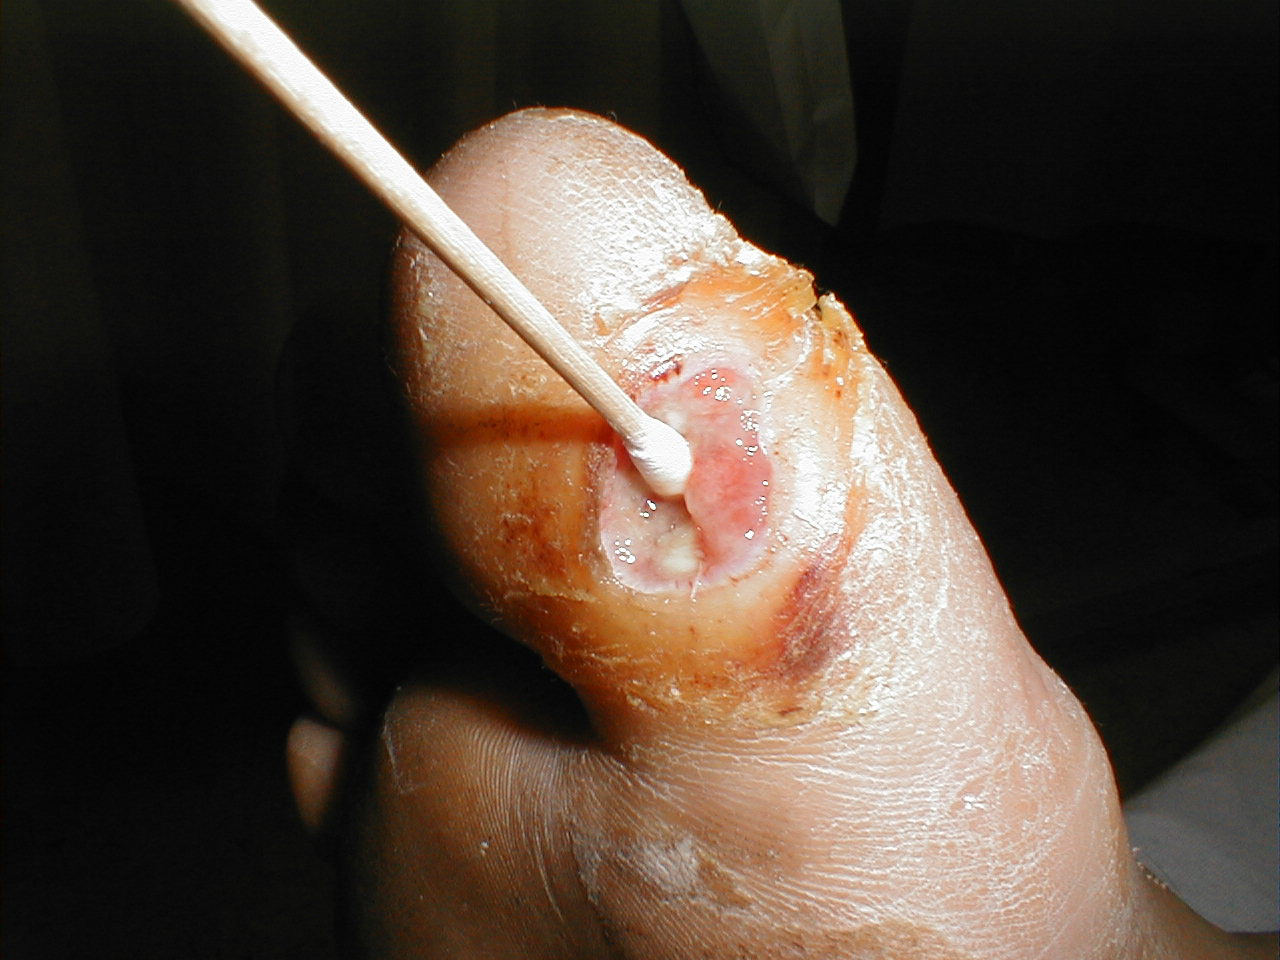 Diabetes induced neuropathy led to development of the ulcer shown above. The Q-tip easily passes to the level of the underlying bone, clinical evidence of osteomyelitis. Incidentally, this is not painful to the patient as he is insensate.